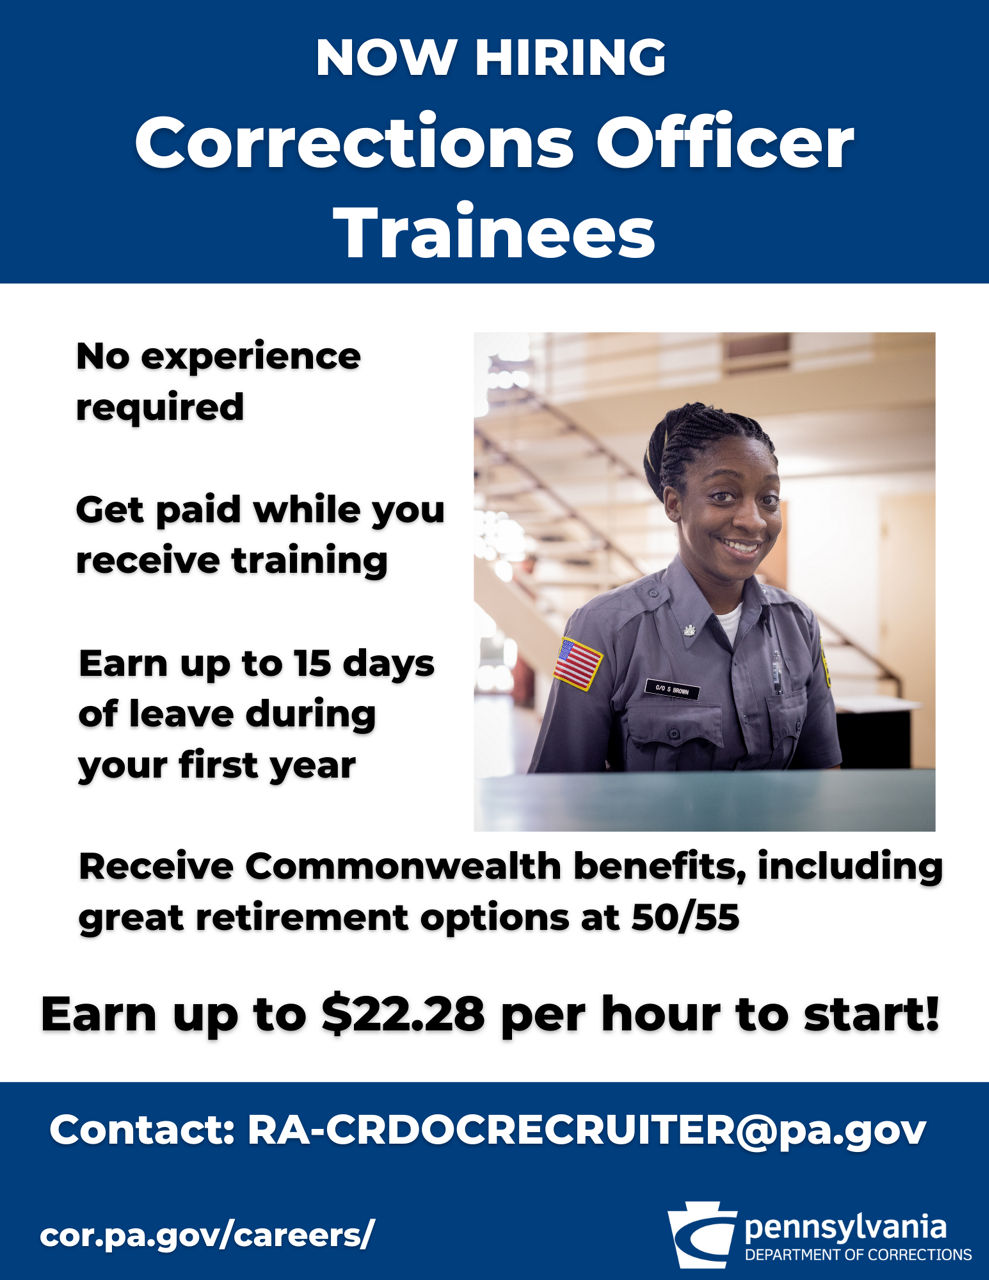 A flyer promoting Corrections Officer Trainee positions in the DOC